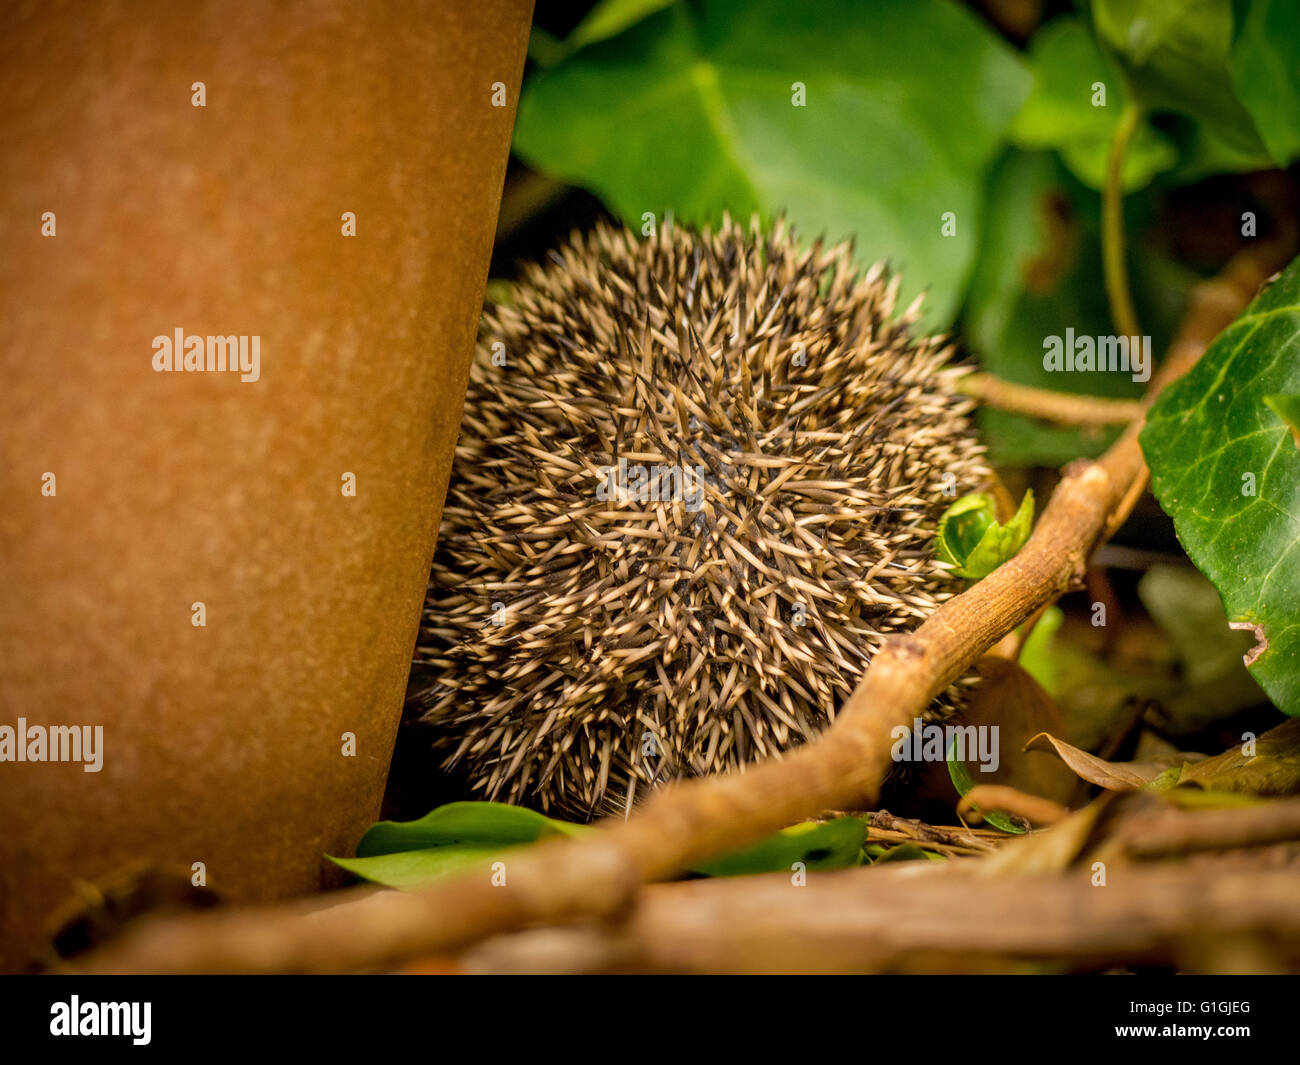 Hedgehog curled up in ball sleeping facing away from camera Stock Photo